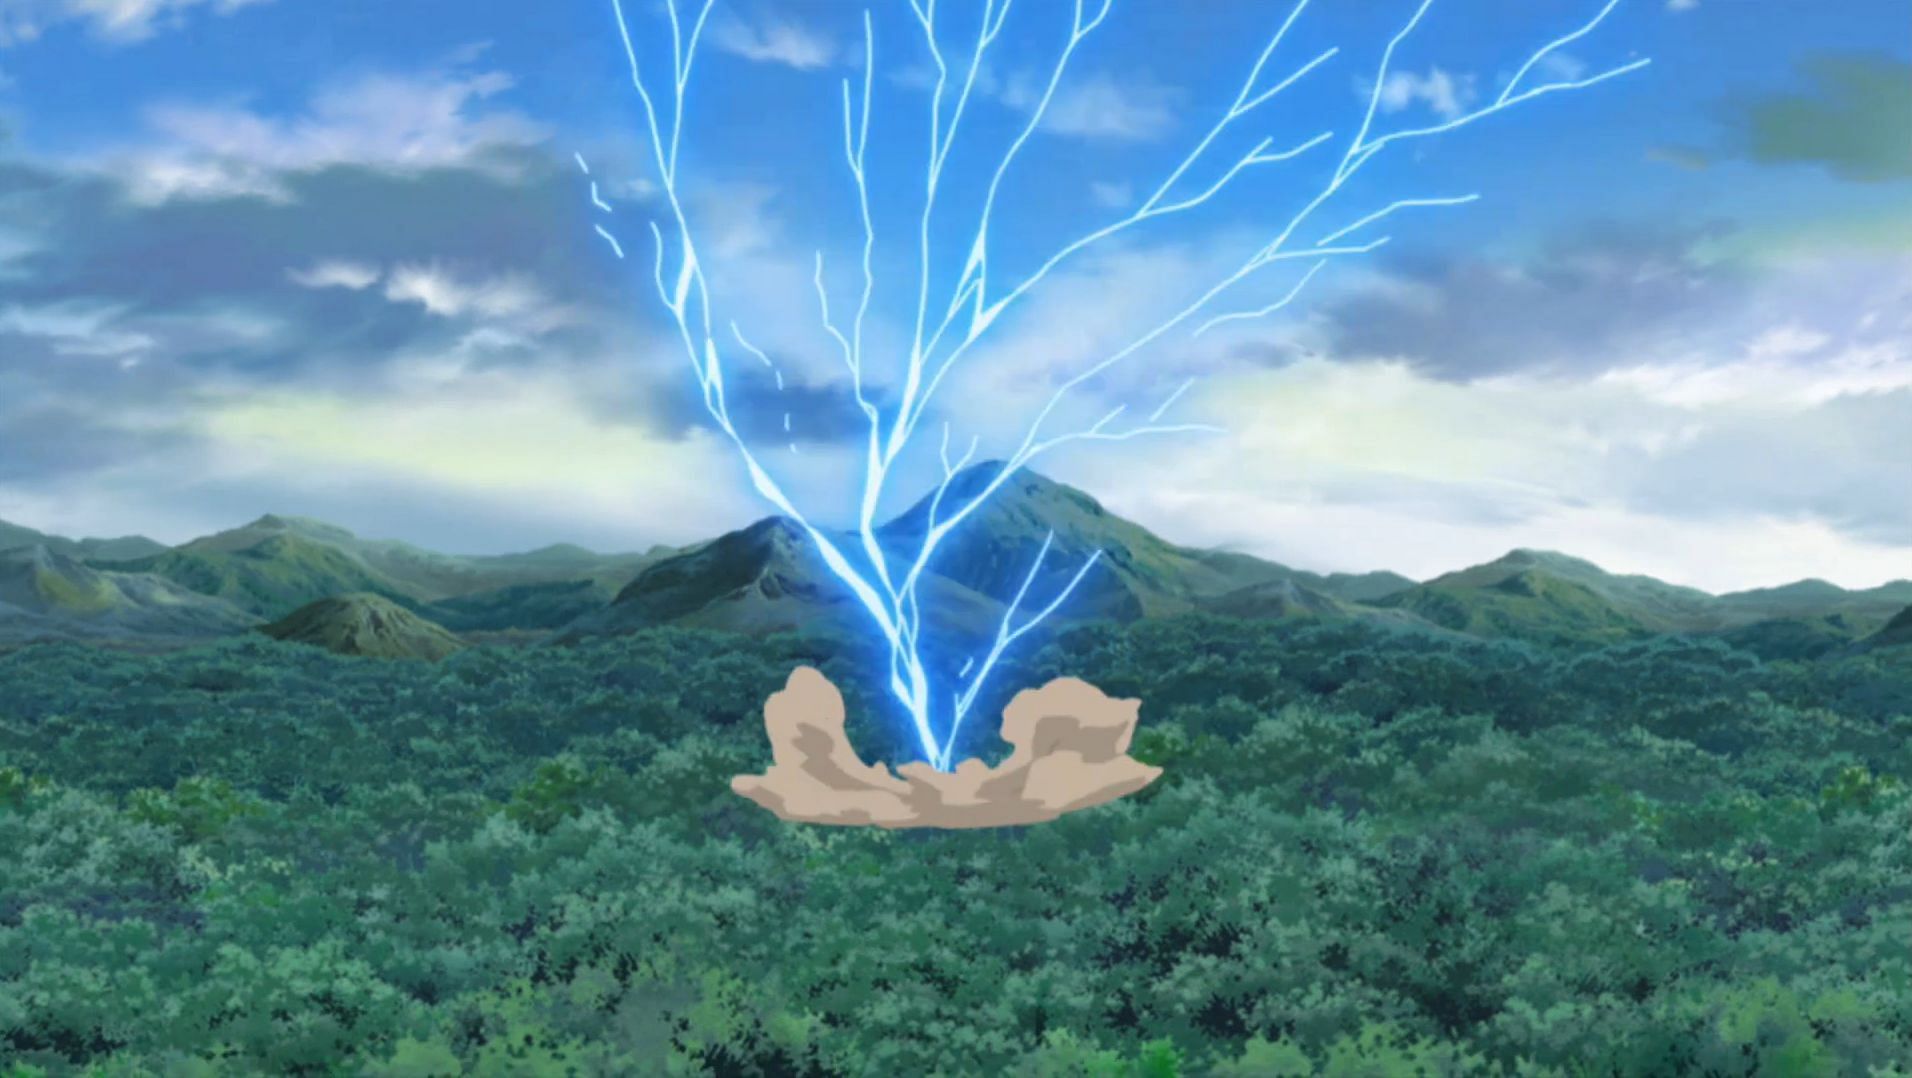 Lightning Release: Thunder Gate being used in the &#039;Naruto Shippuden&#039; anime (Image via Studio Pierrot)